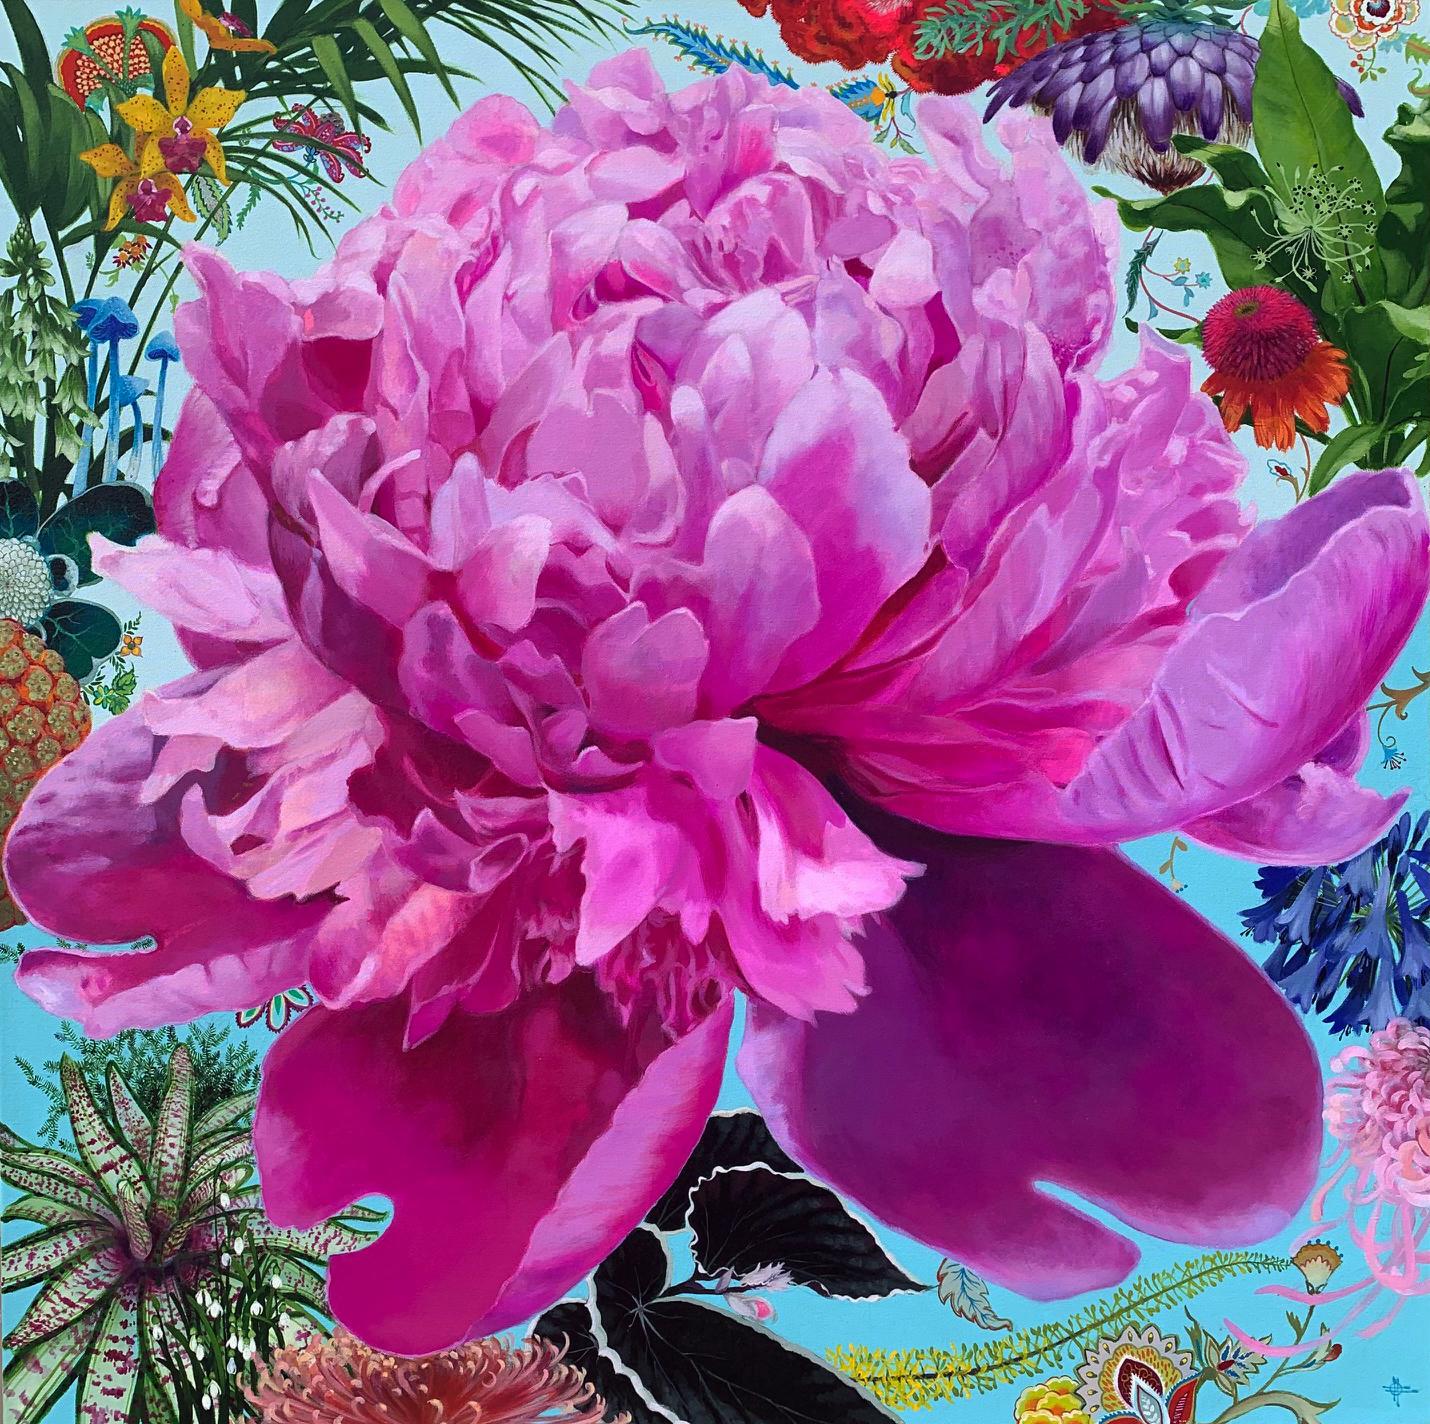 Zemlya - contemporary colorful pink flower decorative acrylic painting  - Painting by Keng Wai Lee